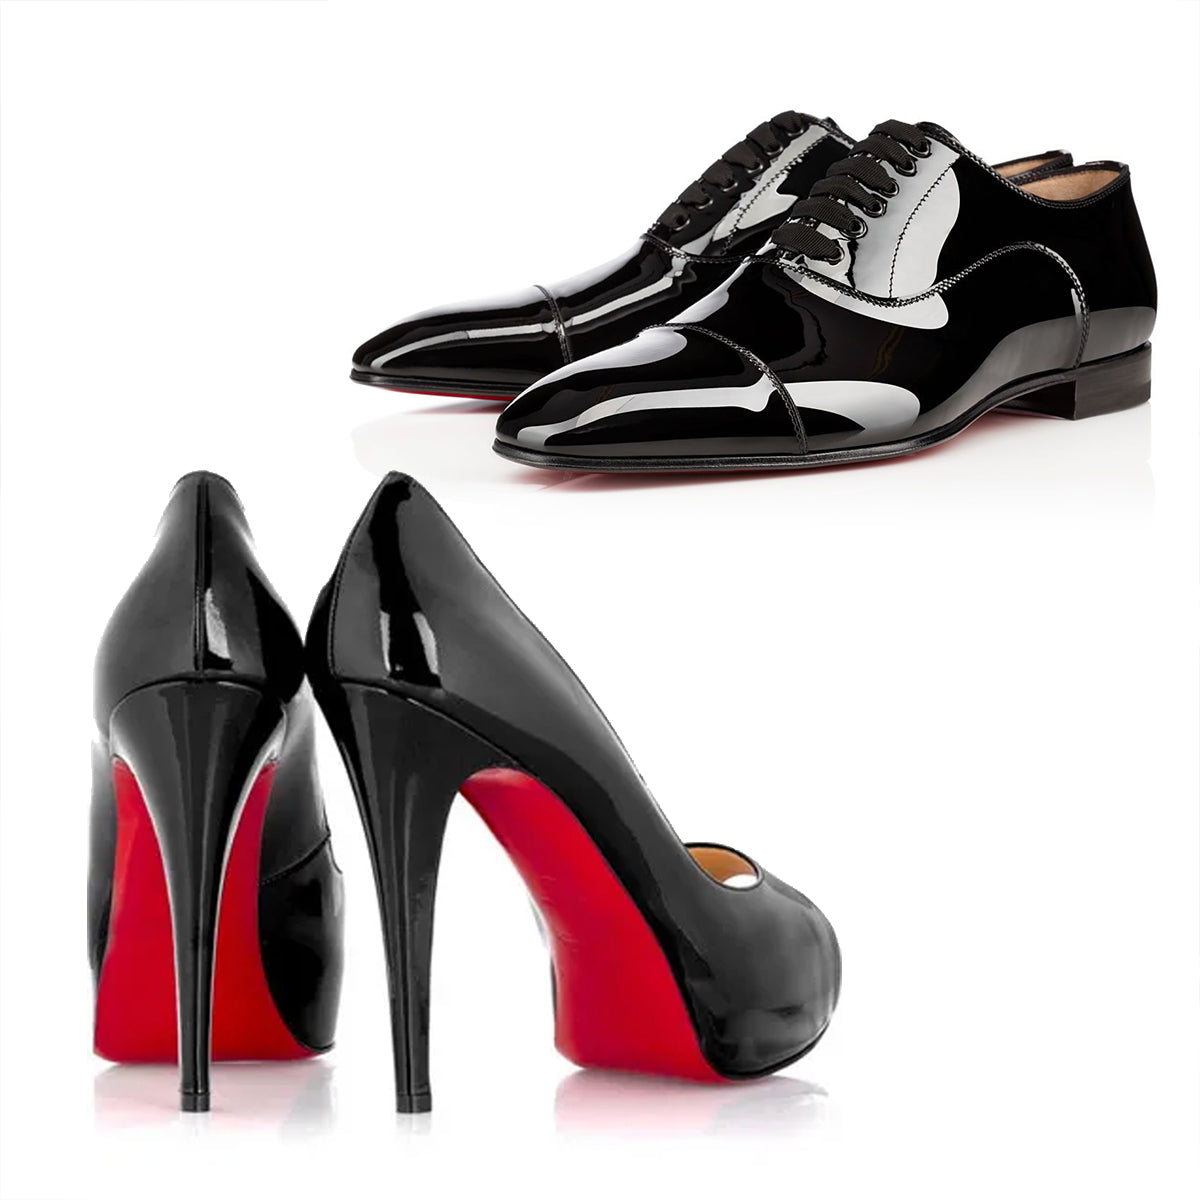 ophøre revolution Kina LOUBOUTIN SHOES / HEELS SERVICES WITH RETURN SHIPPING PRICE - £80+ -  Sneakers ER